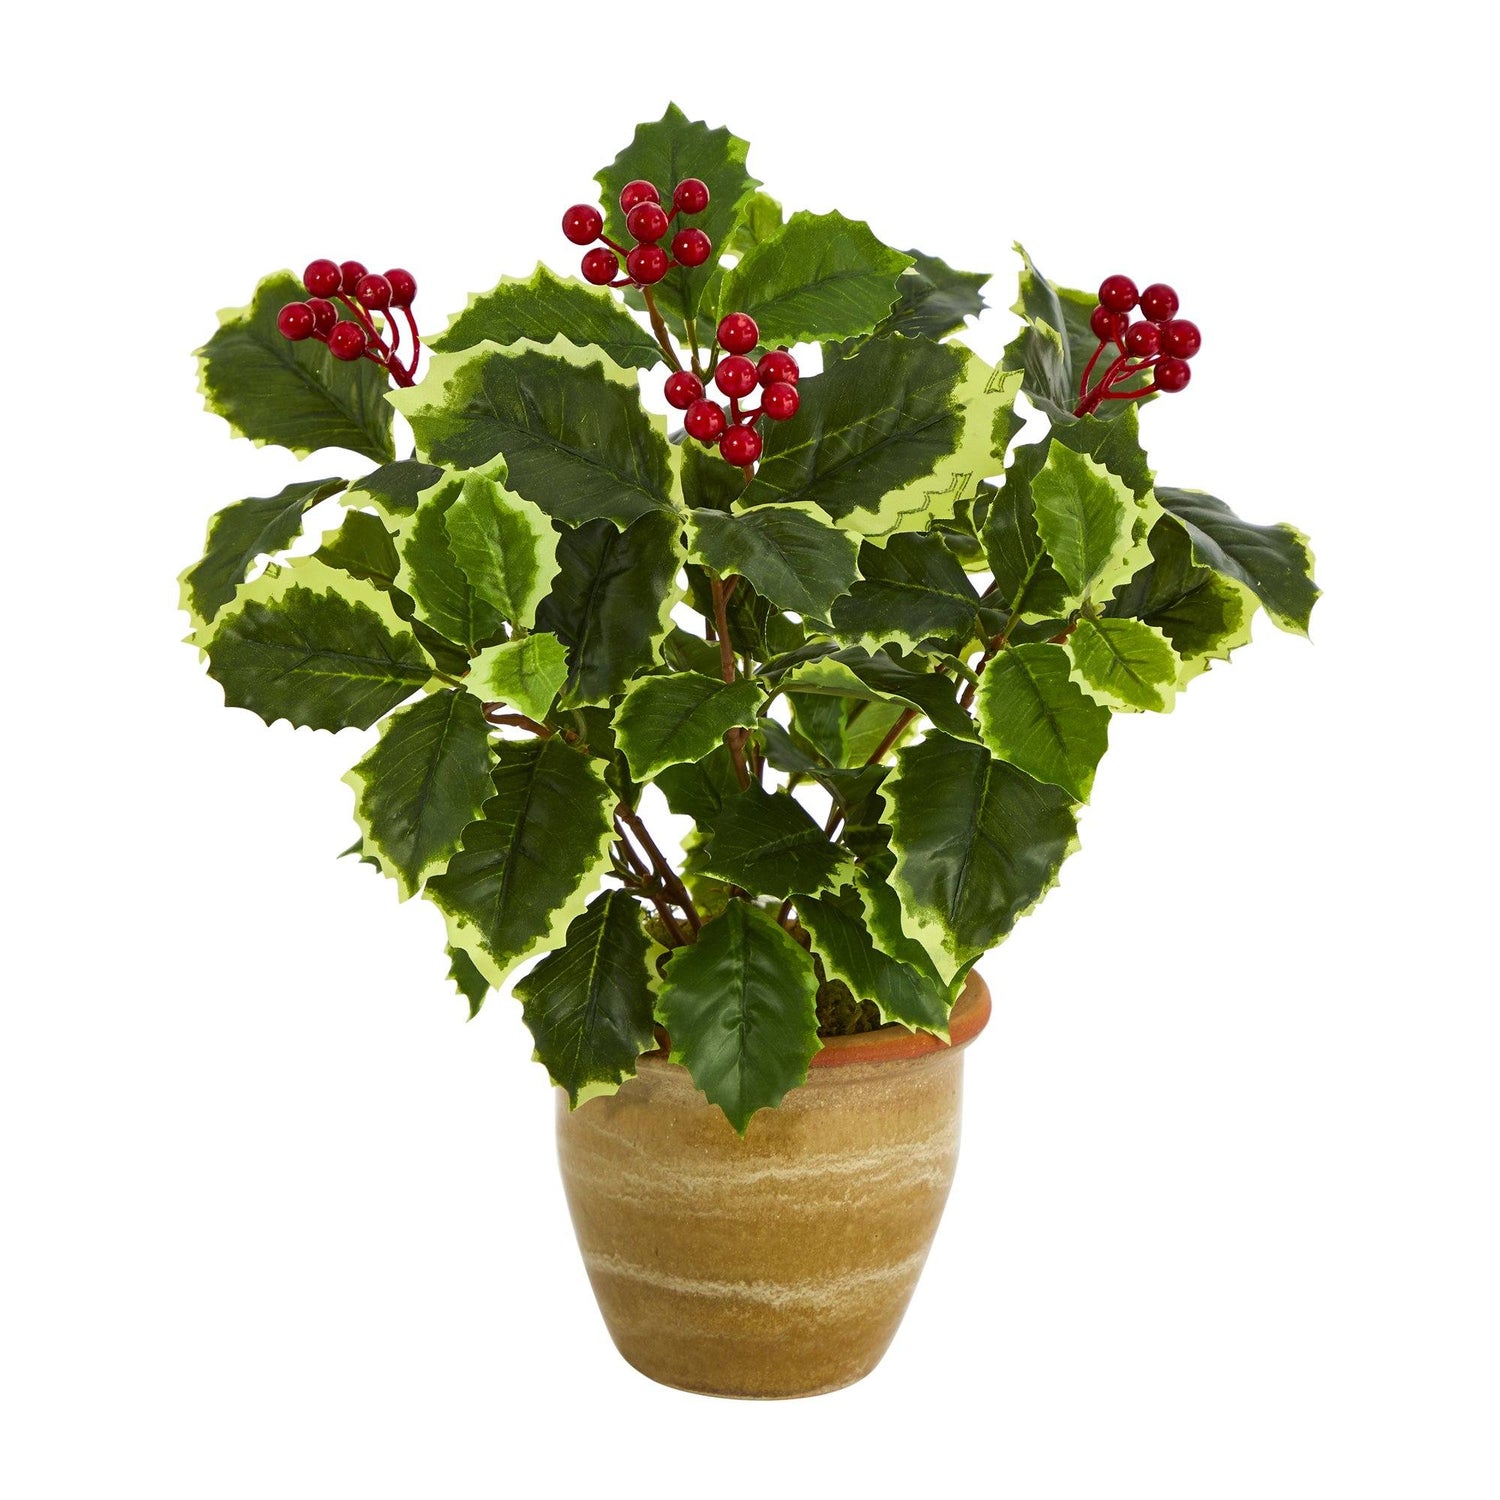 14” Variegated Holly Leaf Artificial Plant in Ceramic Planter (Real Touch)